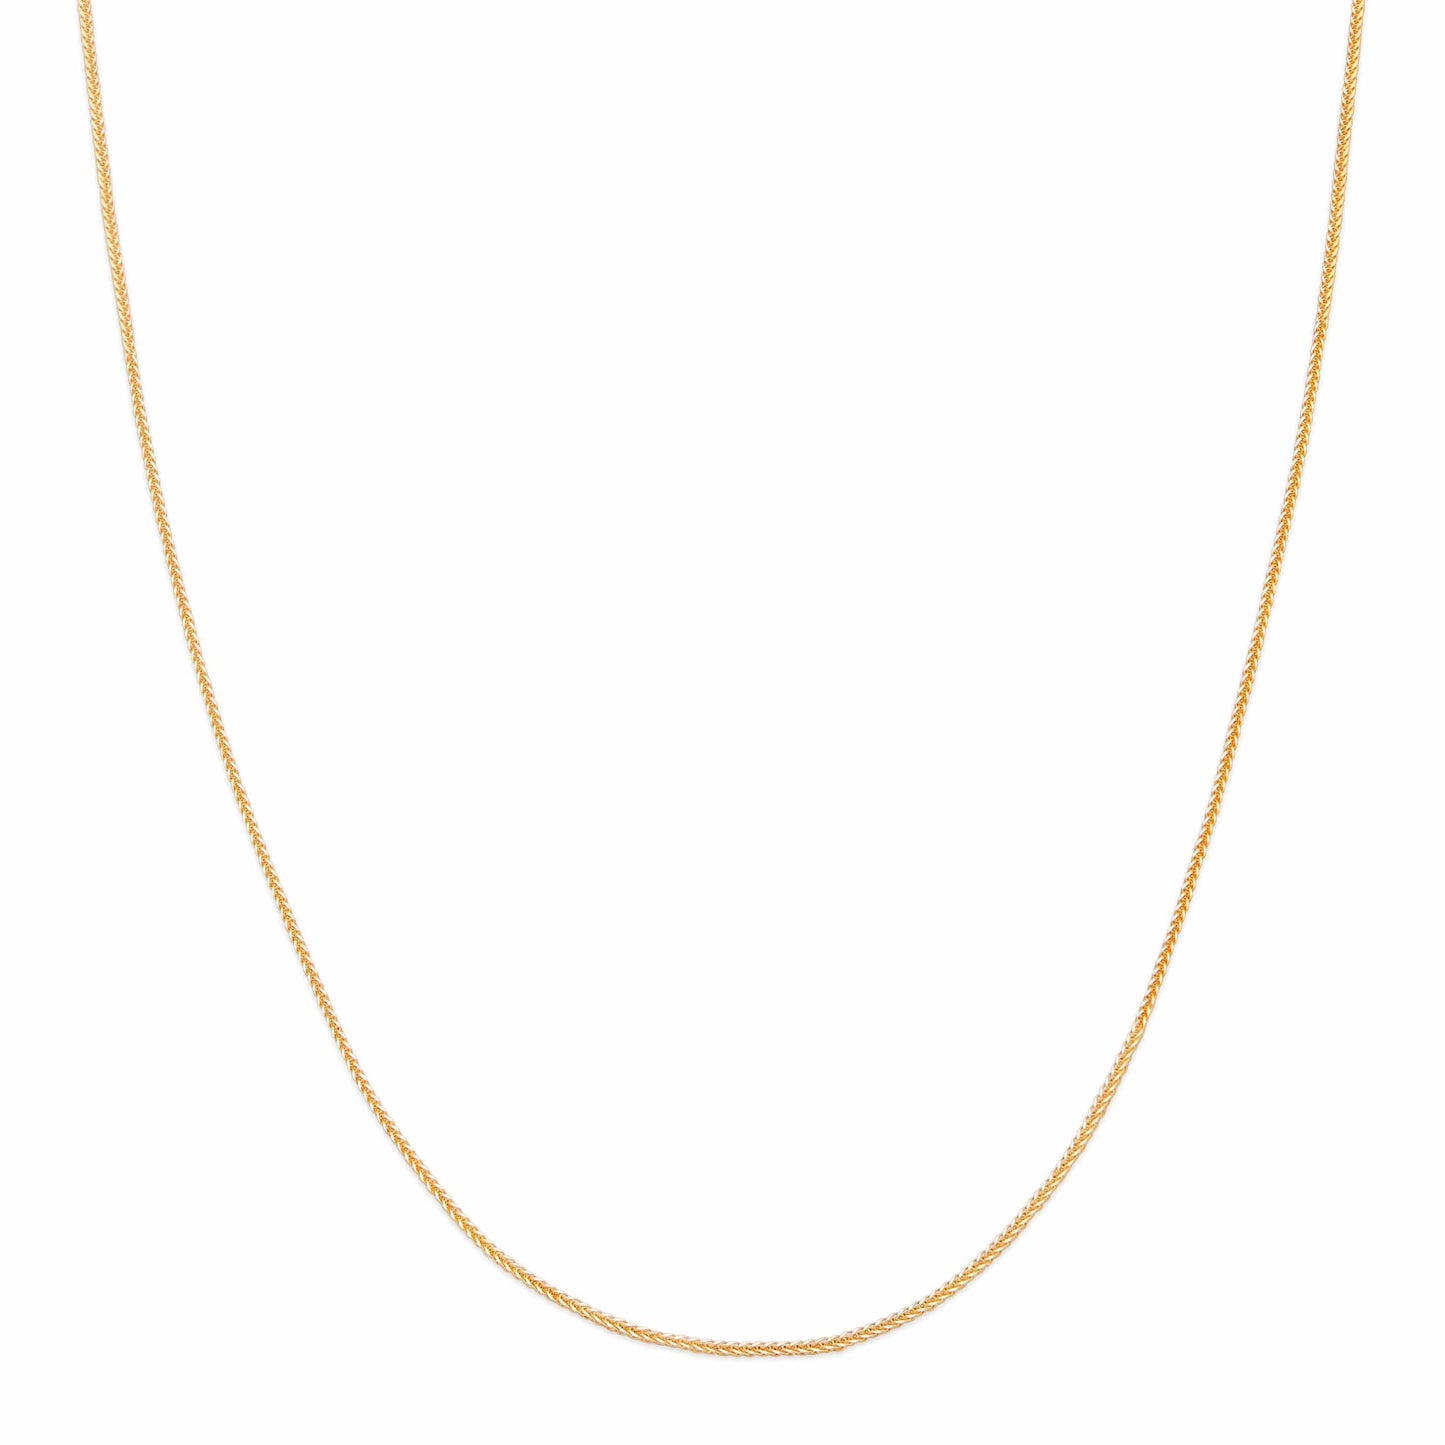 MONDO CATTOLICO Jewelry Cm 60 (23.6 in) Yellow Gold Foxtail chain